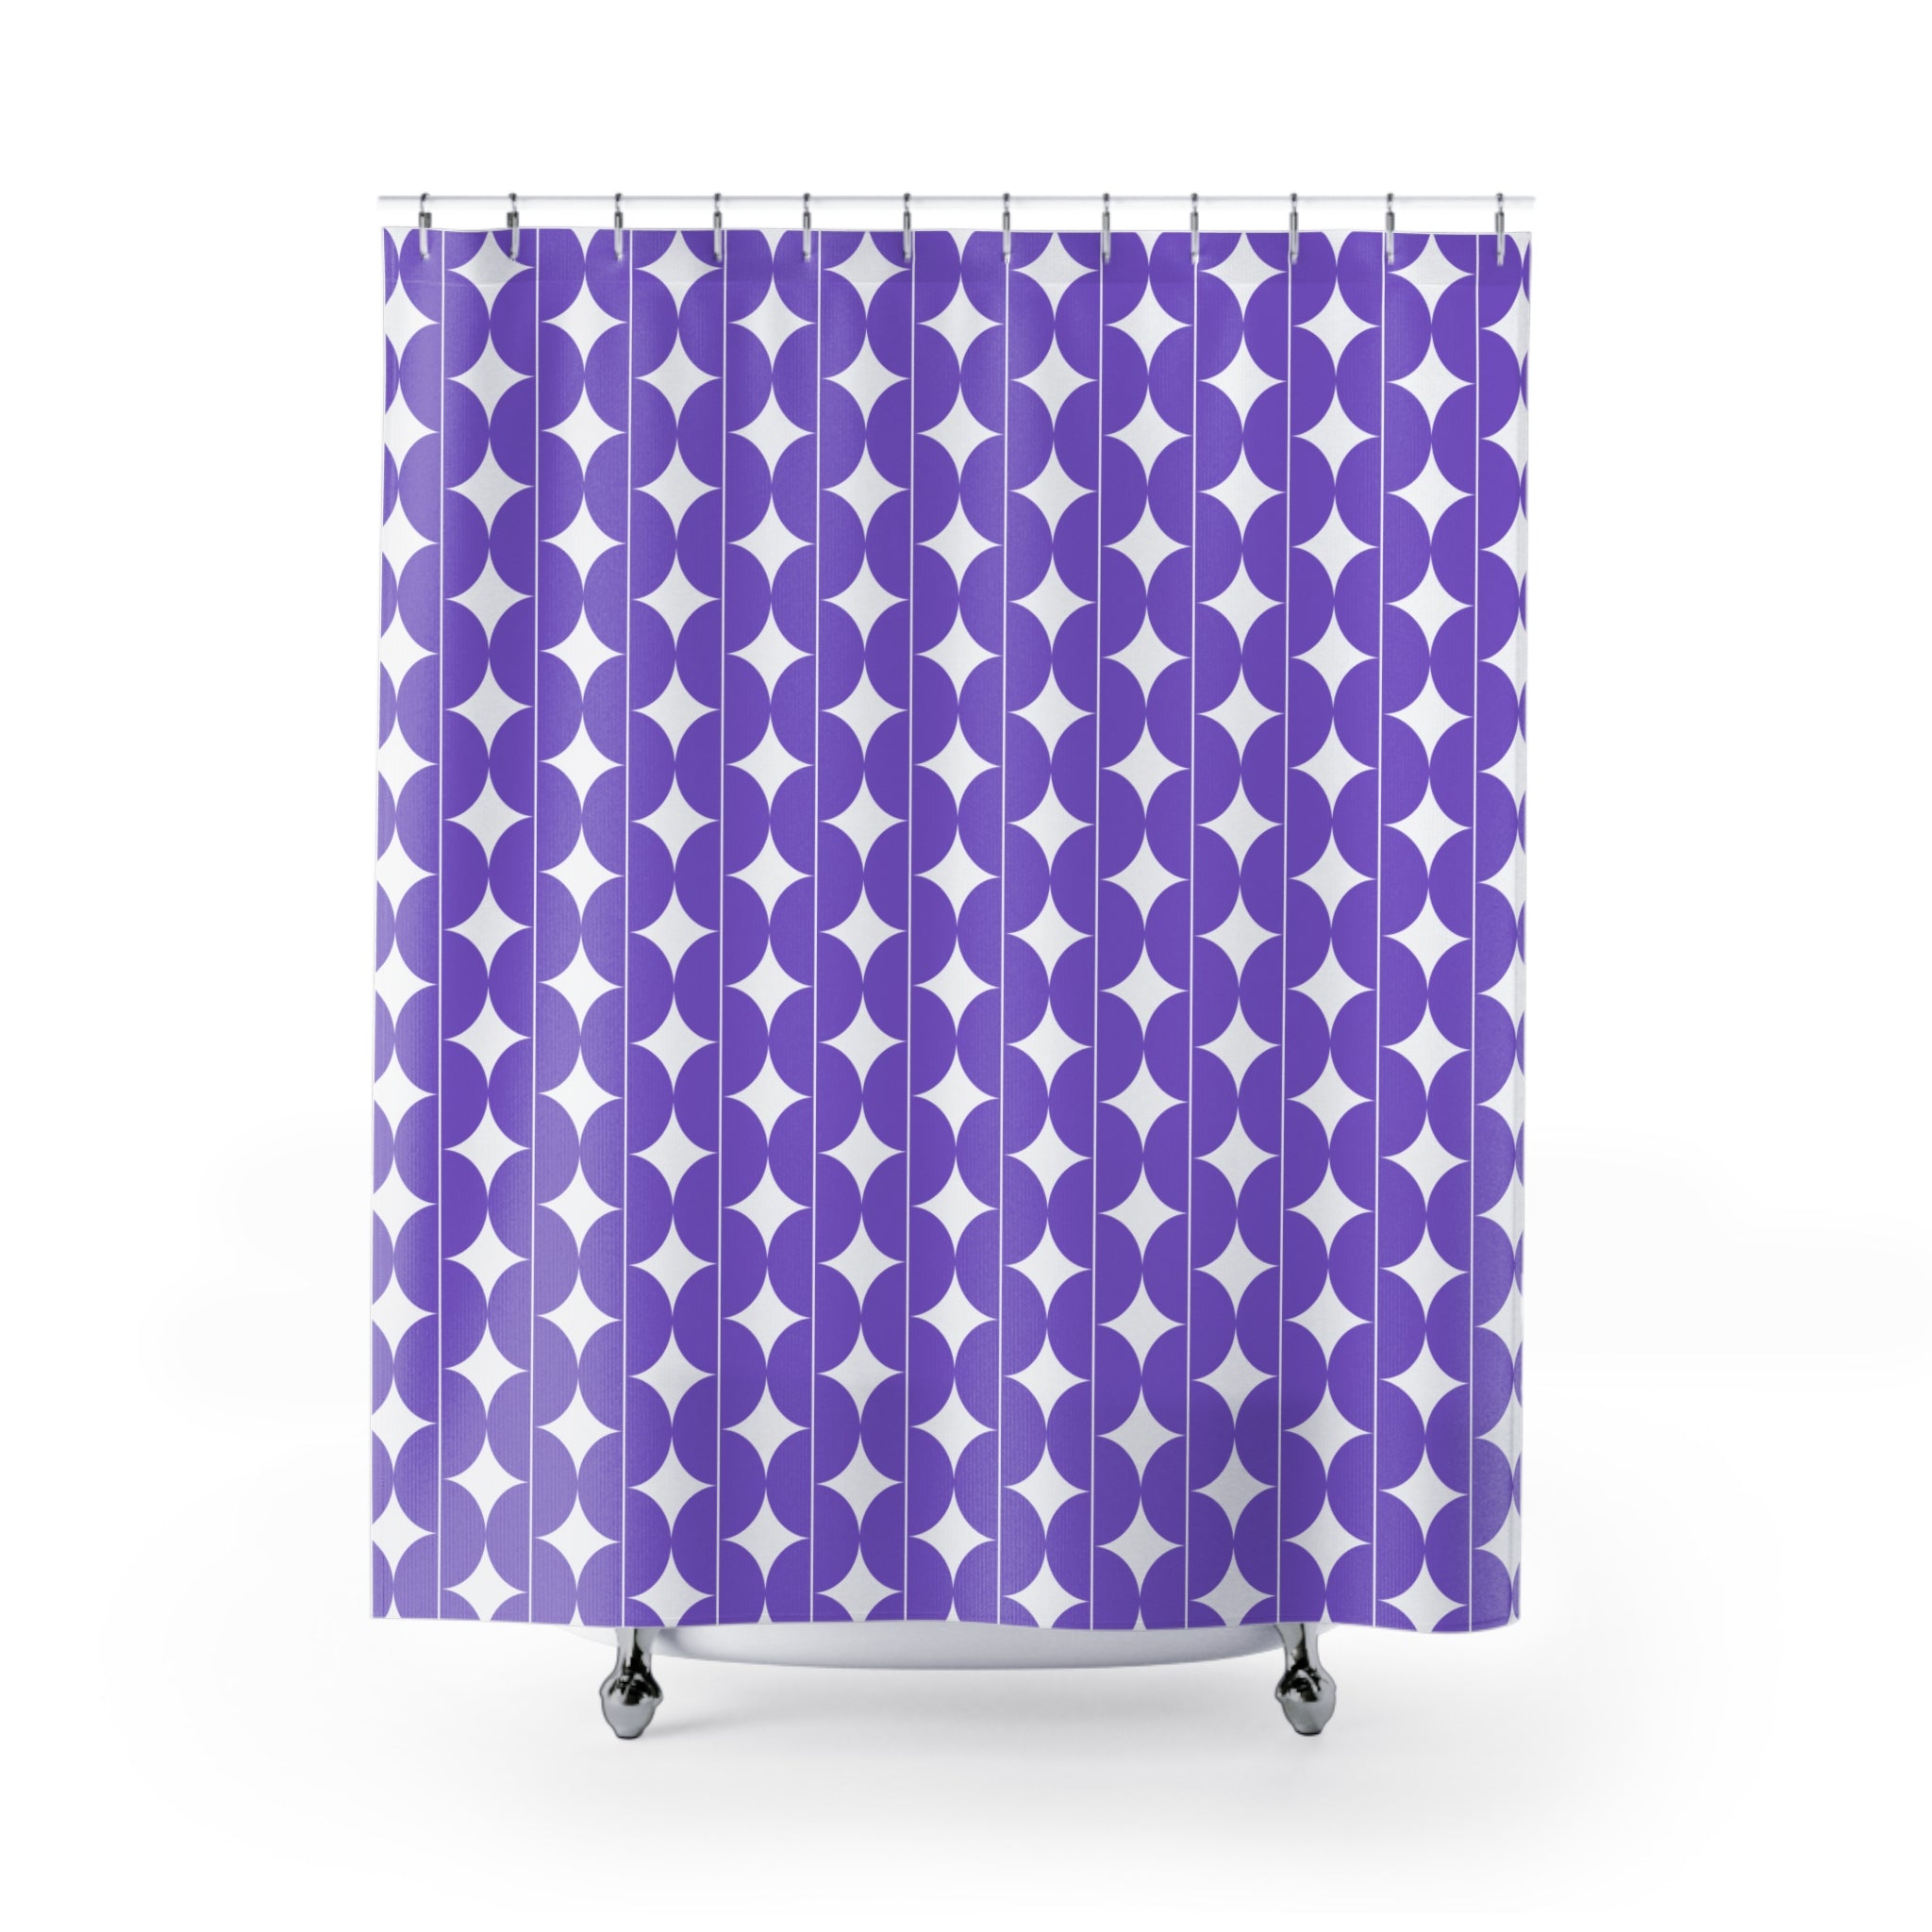 https://creationsbychrisandcarlos.store/products/920-horizon-ave-purple-shower-curtain